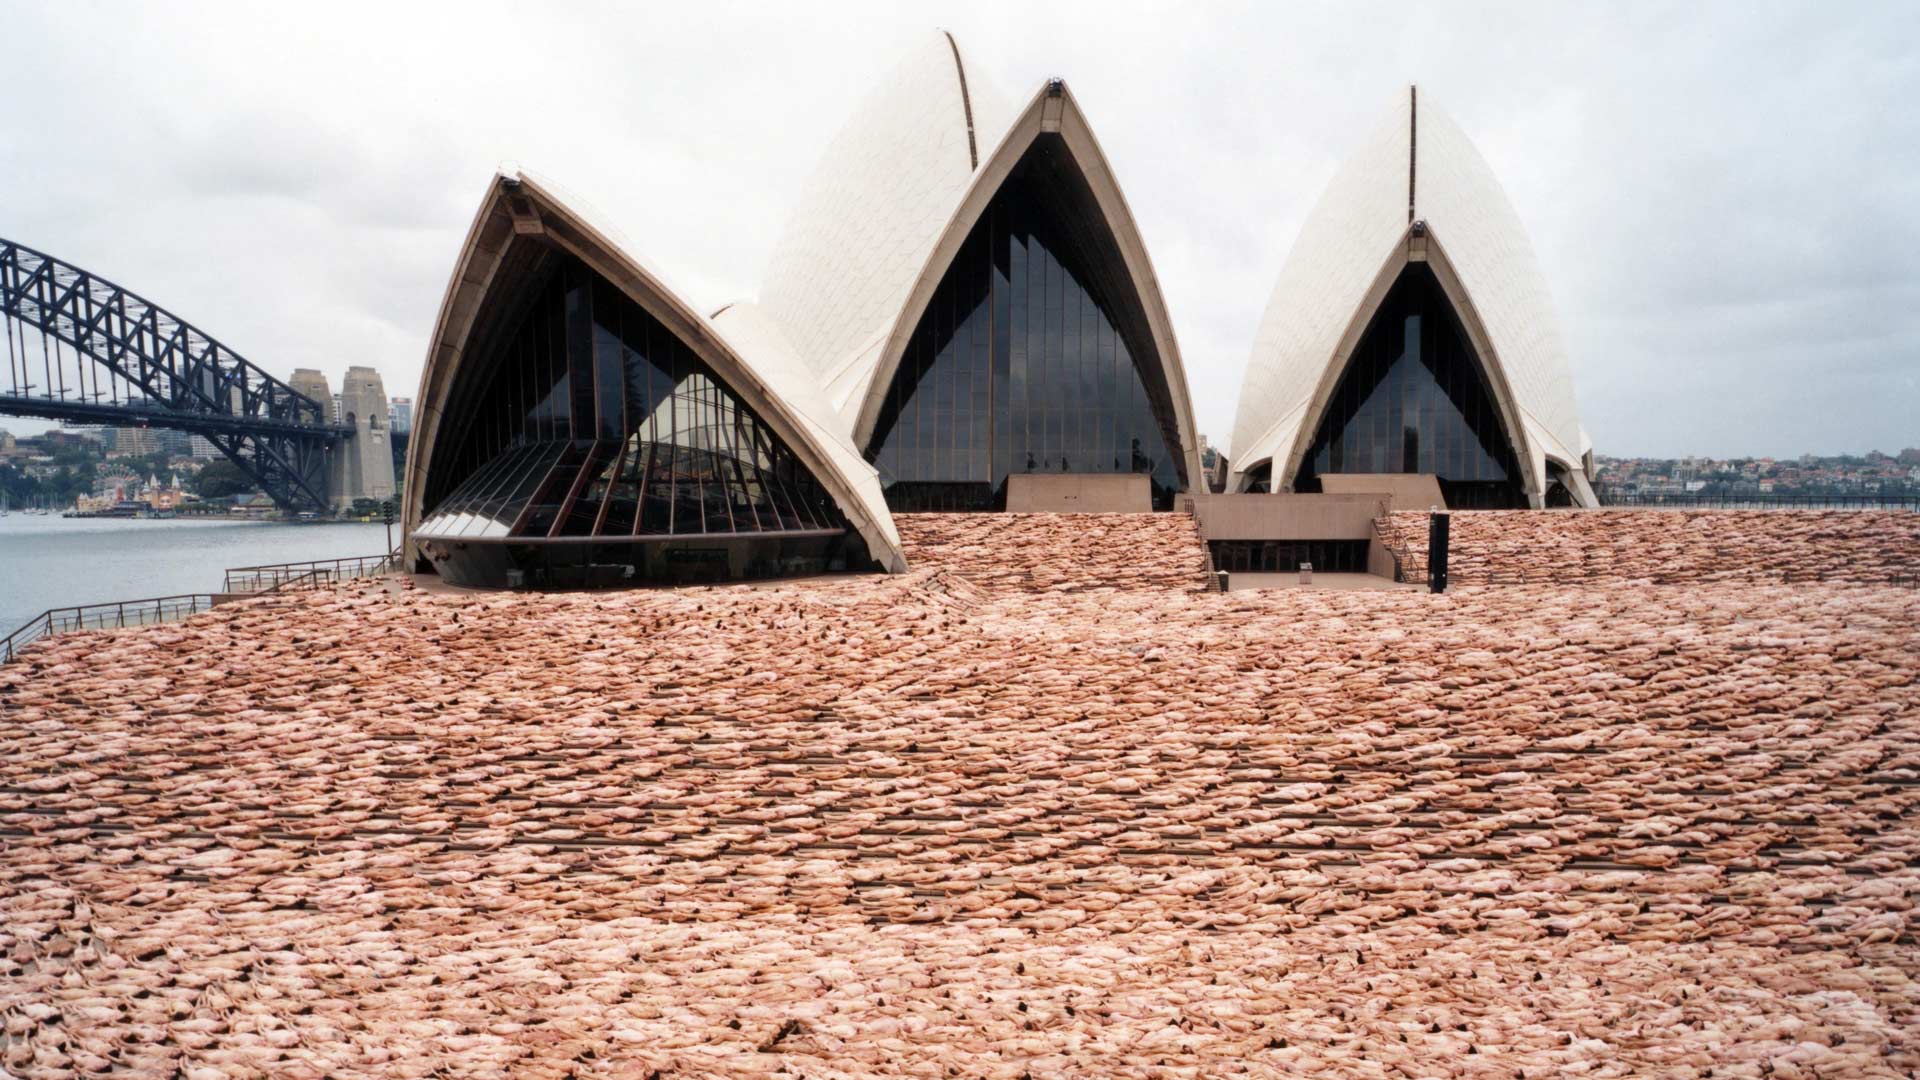 Artist Spencer Tunick's Plans to Stage a Mass Nude Work on a Melbourne Rooftop Have Been Quashed